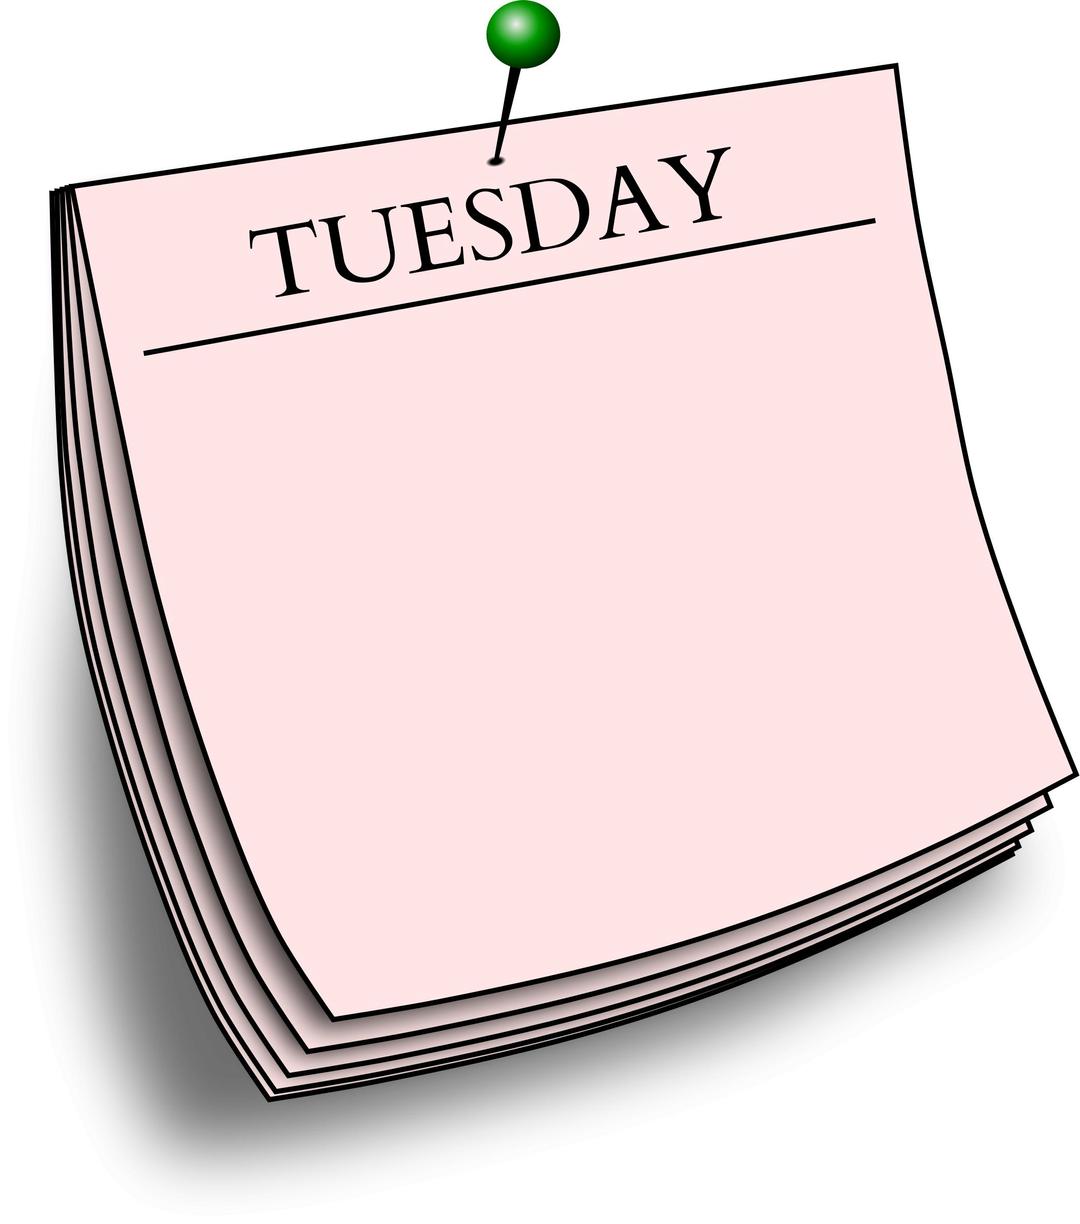 Daily note - Tuesday png transparent